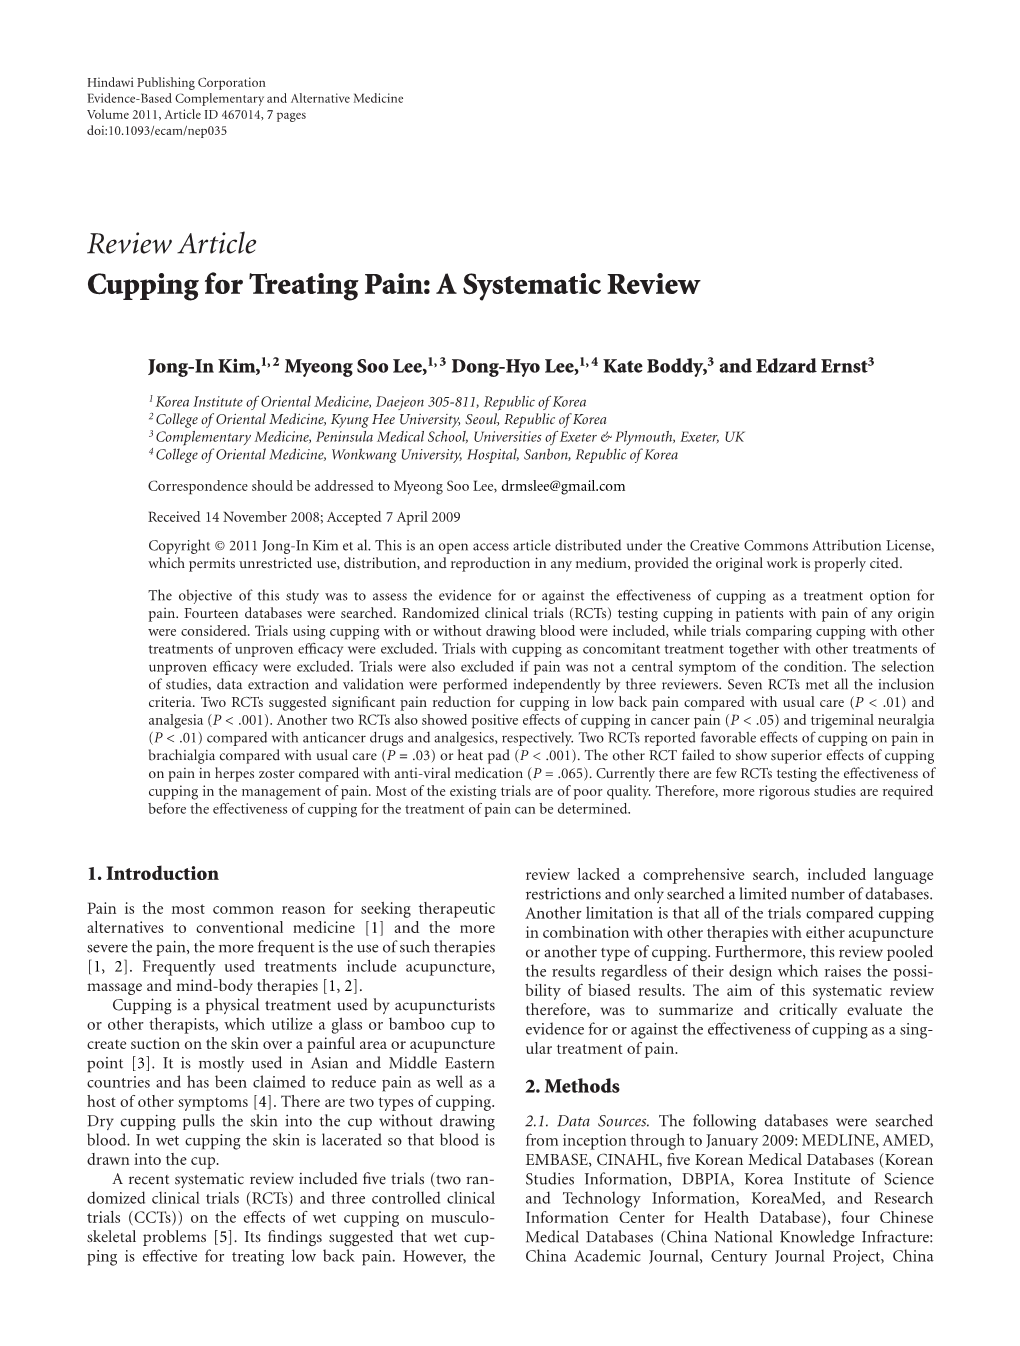 Cupping for Treating Pain: a Systematic Review